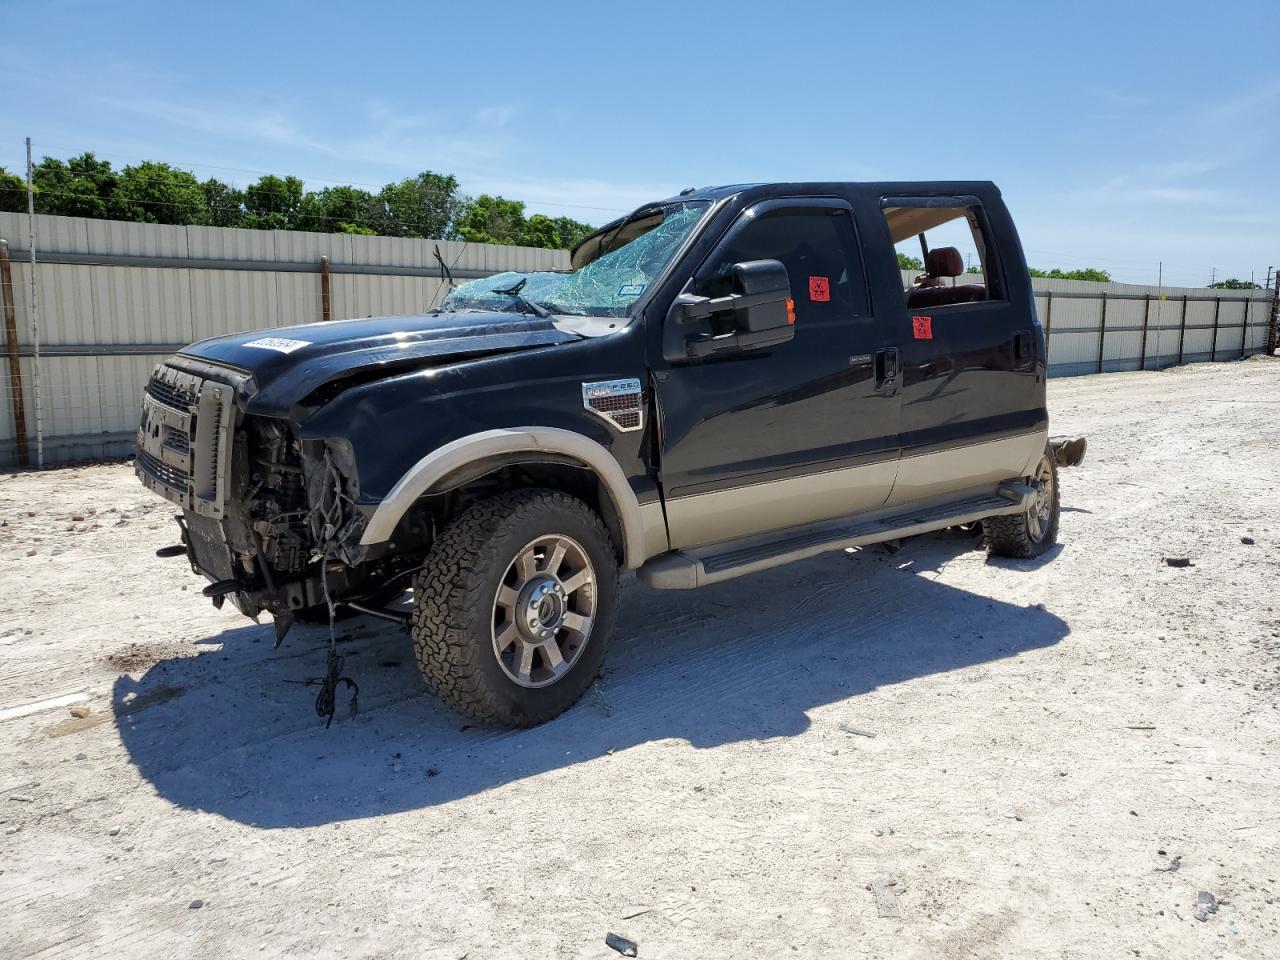 vin: 1FTSW2BR2AEB13189 1FTSW2BR2AEB13189 2010 ford f250 6400 for Sale in 78130 7208, Tx - Austin, New Braunfels, Texas, USA